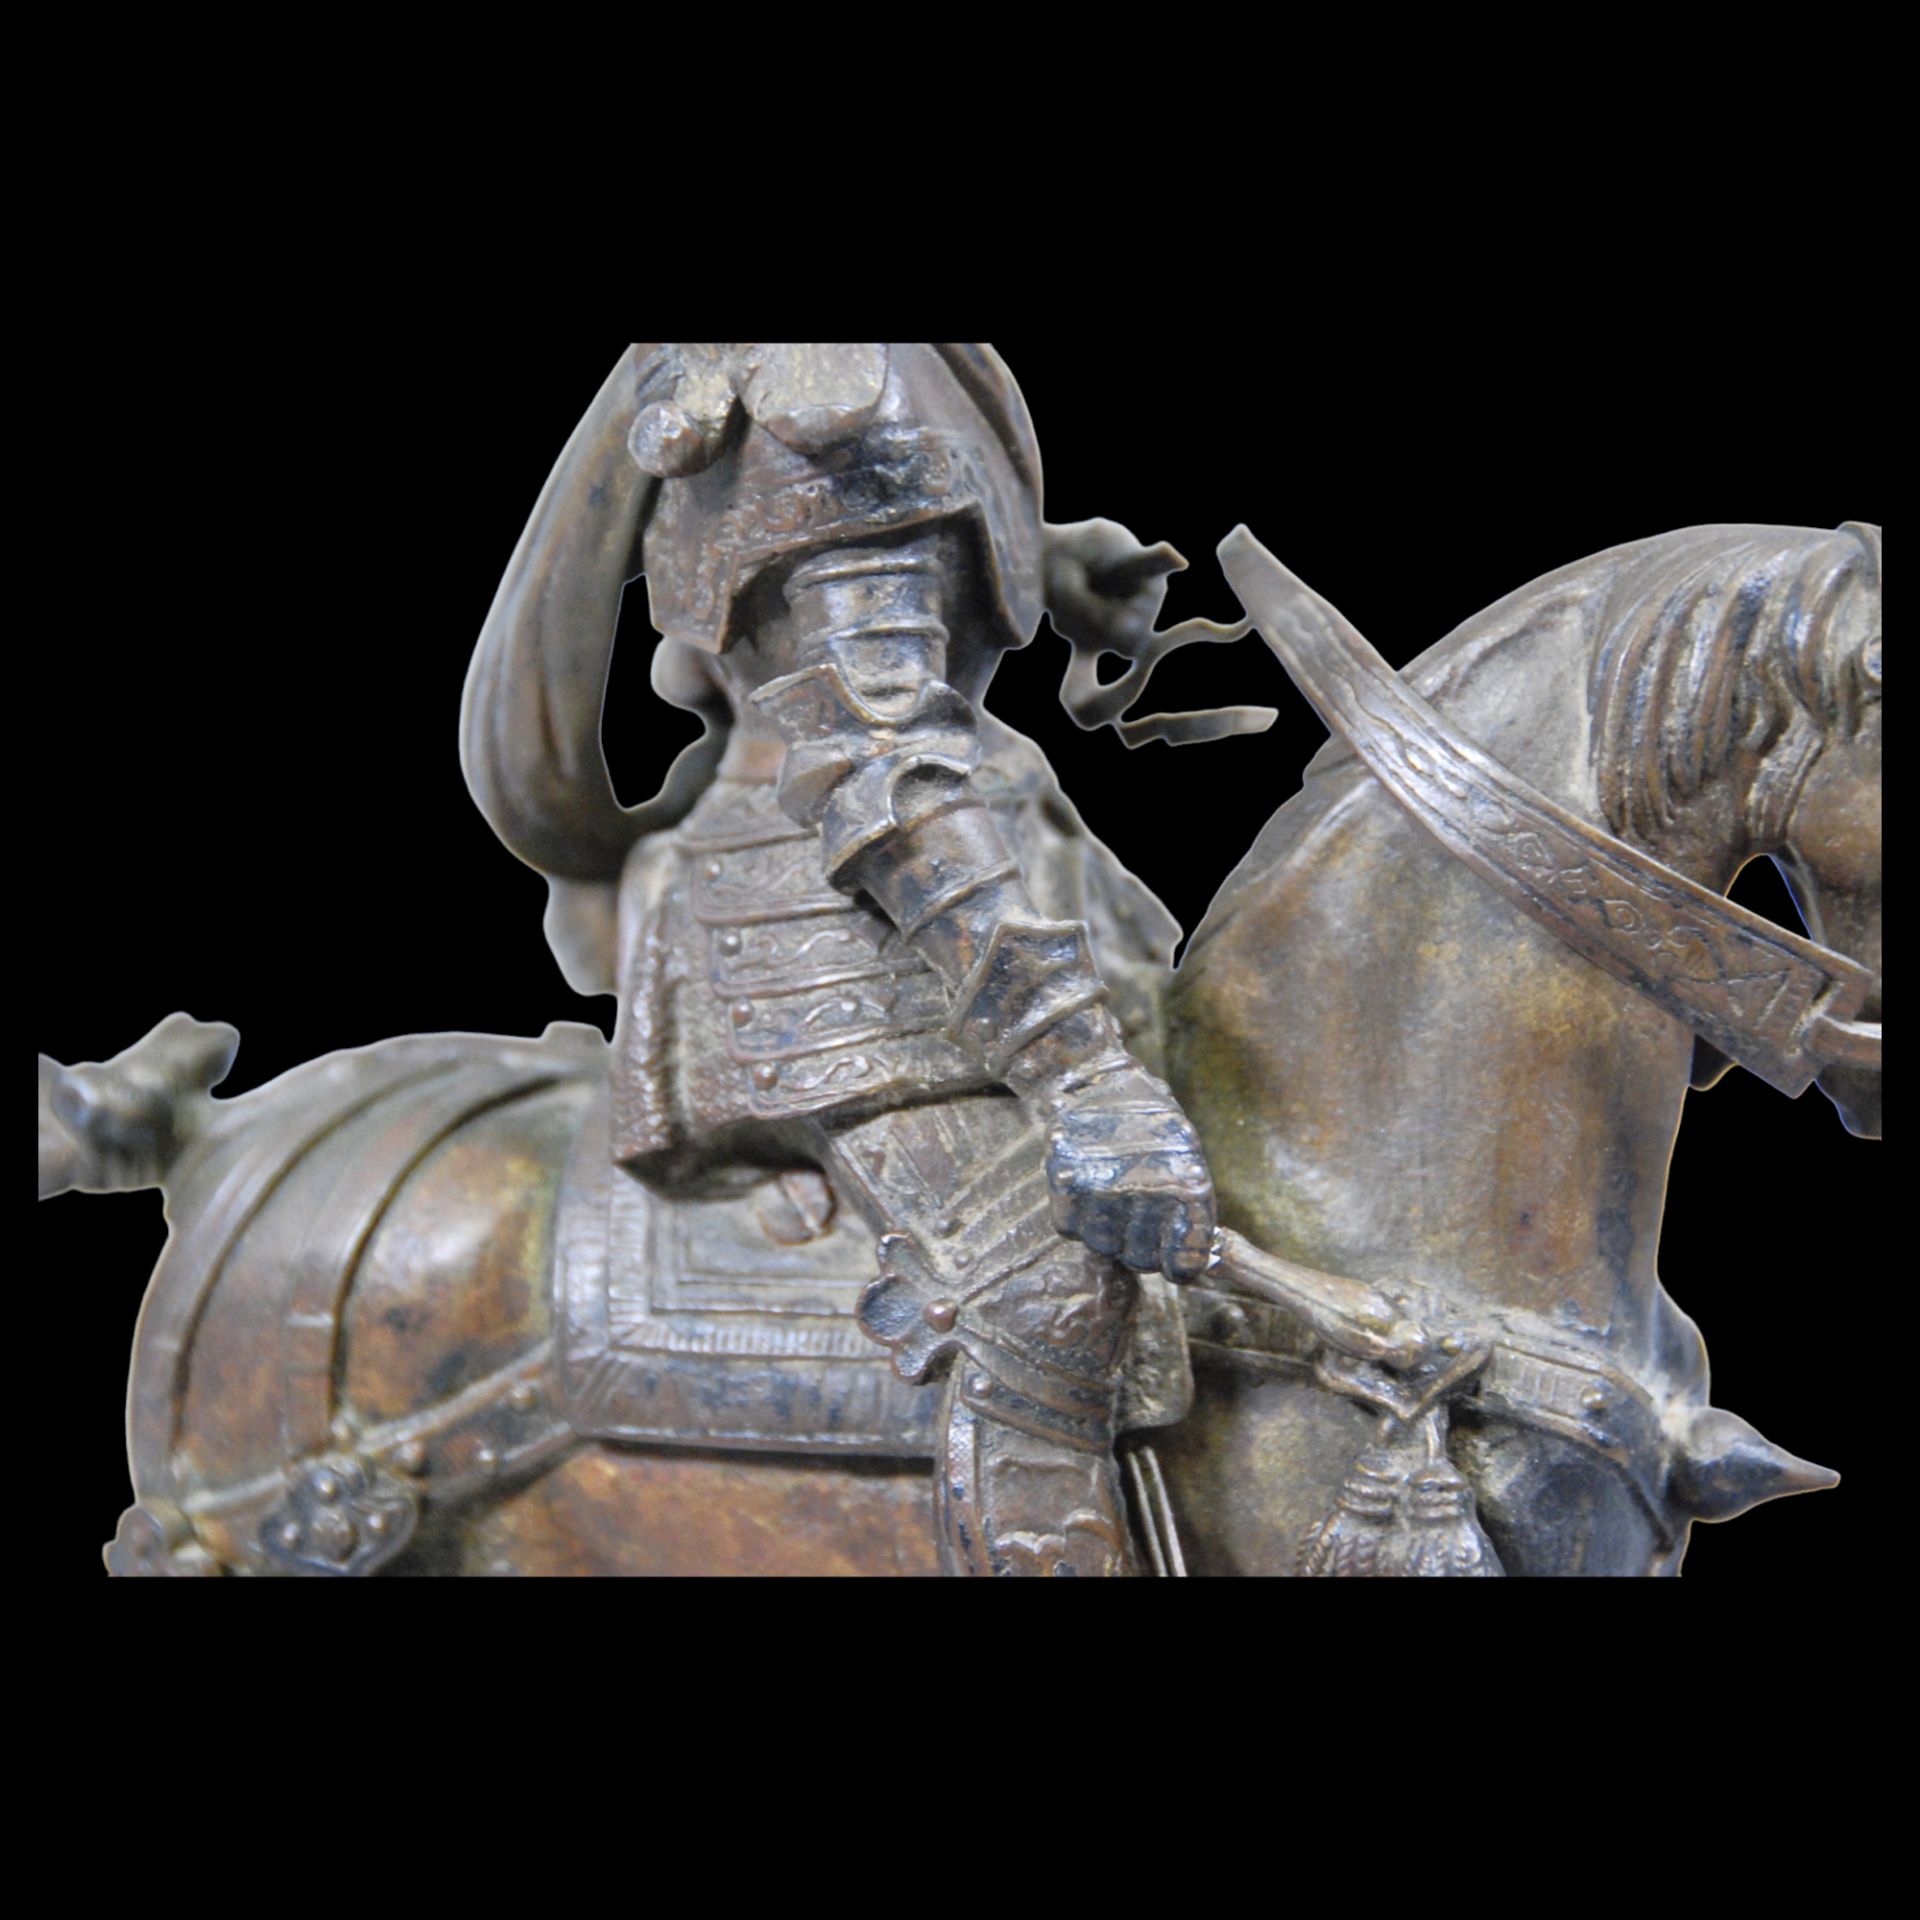 A bronze composition depicting an equestrian knight of the medieval period at a tournament. - Image 9 of 12